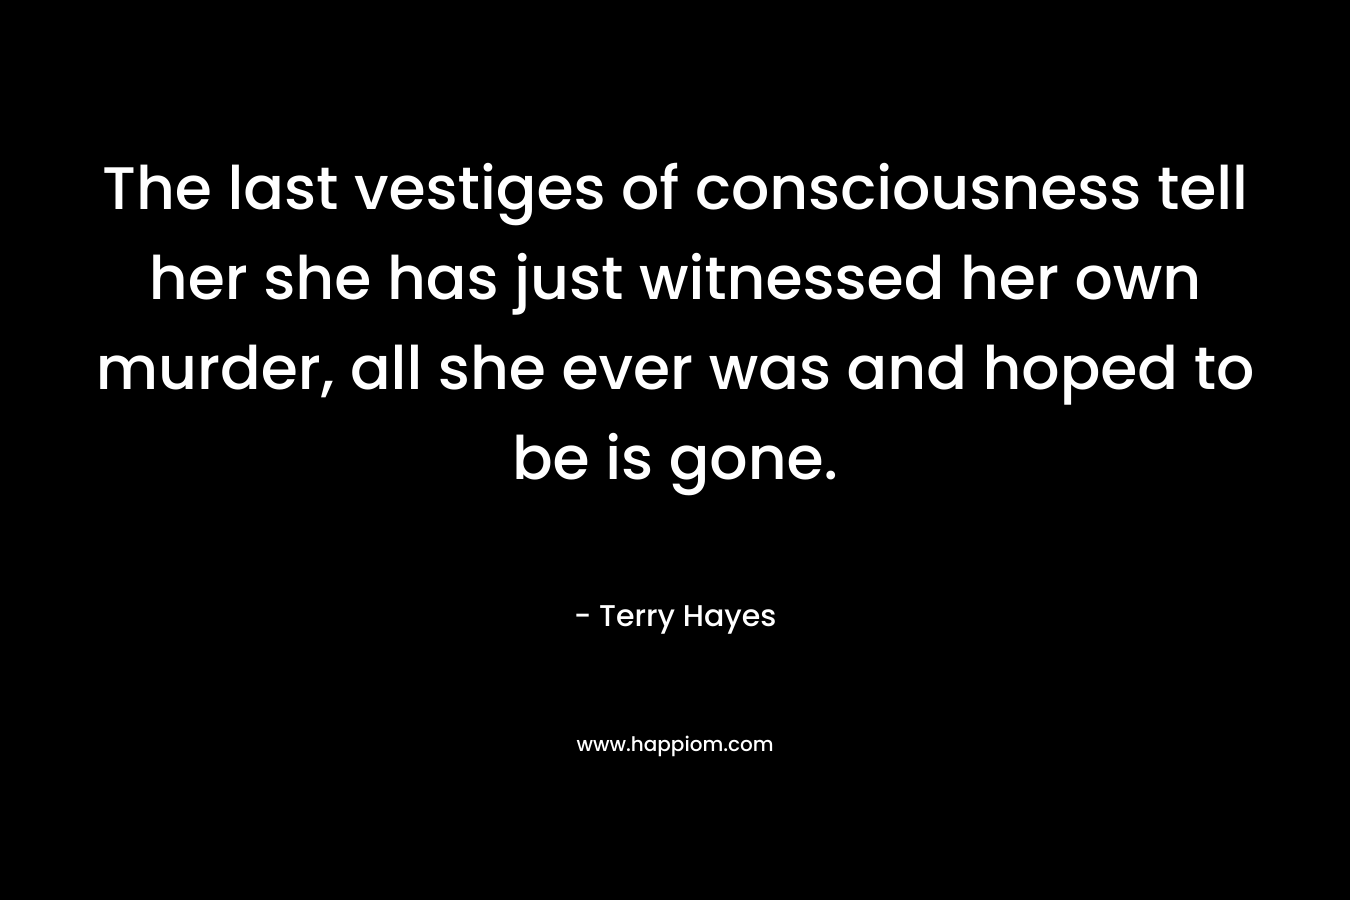 The last vestiges of consciousness tell her she has just witnessed her own murder, all she ever was and hoped to be is gone. – Terry Hayes